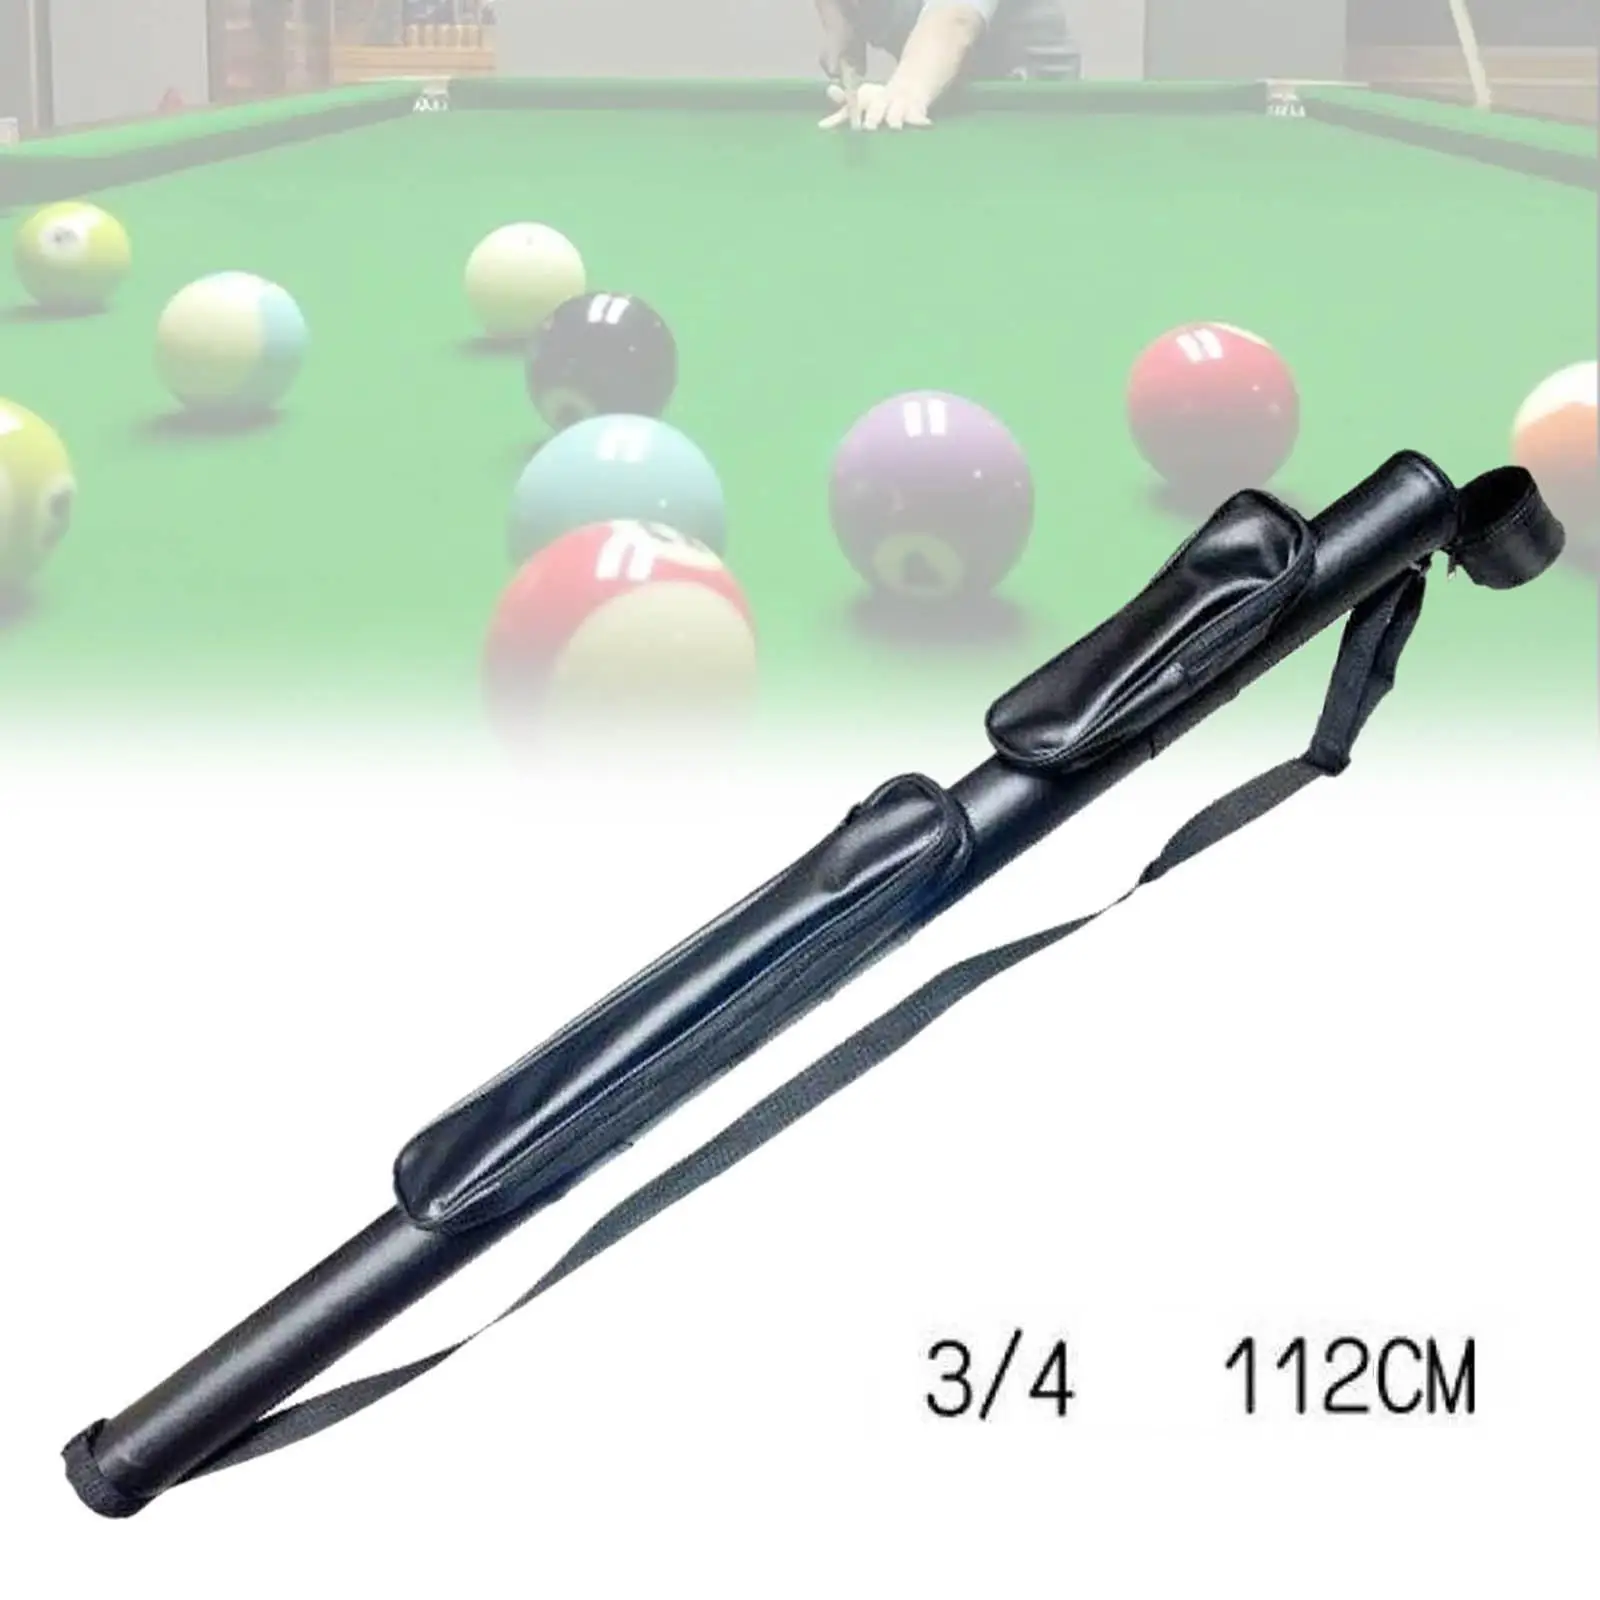 Billiards Pool Cue Case with Shoulder Strap Carrying Box Snooker Club Billiard Stick Rod Protector Dust Proof Professional